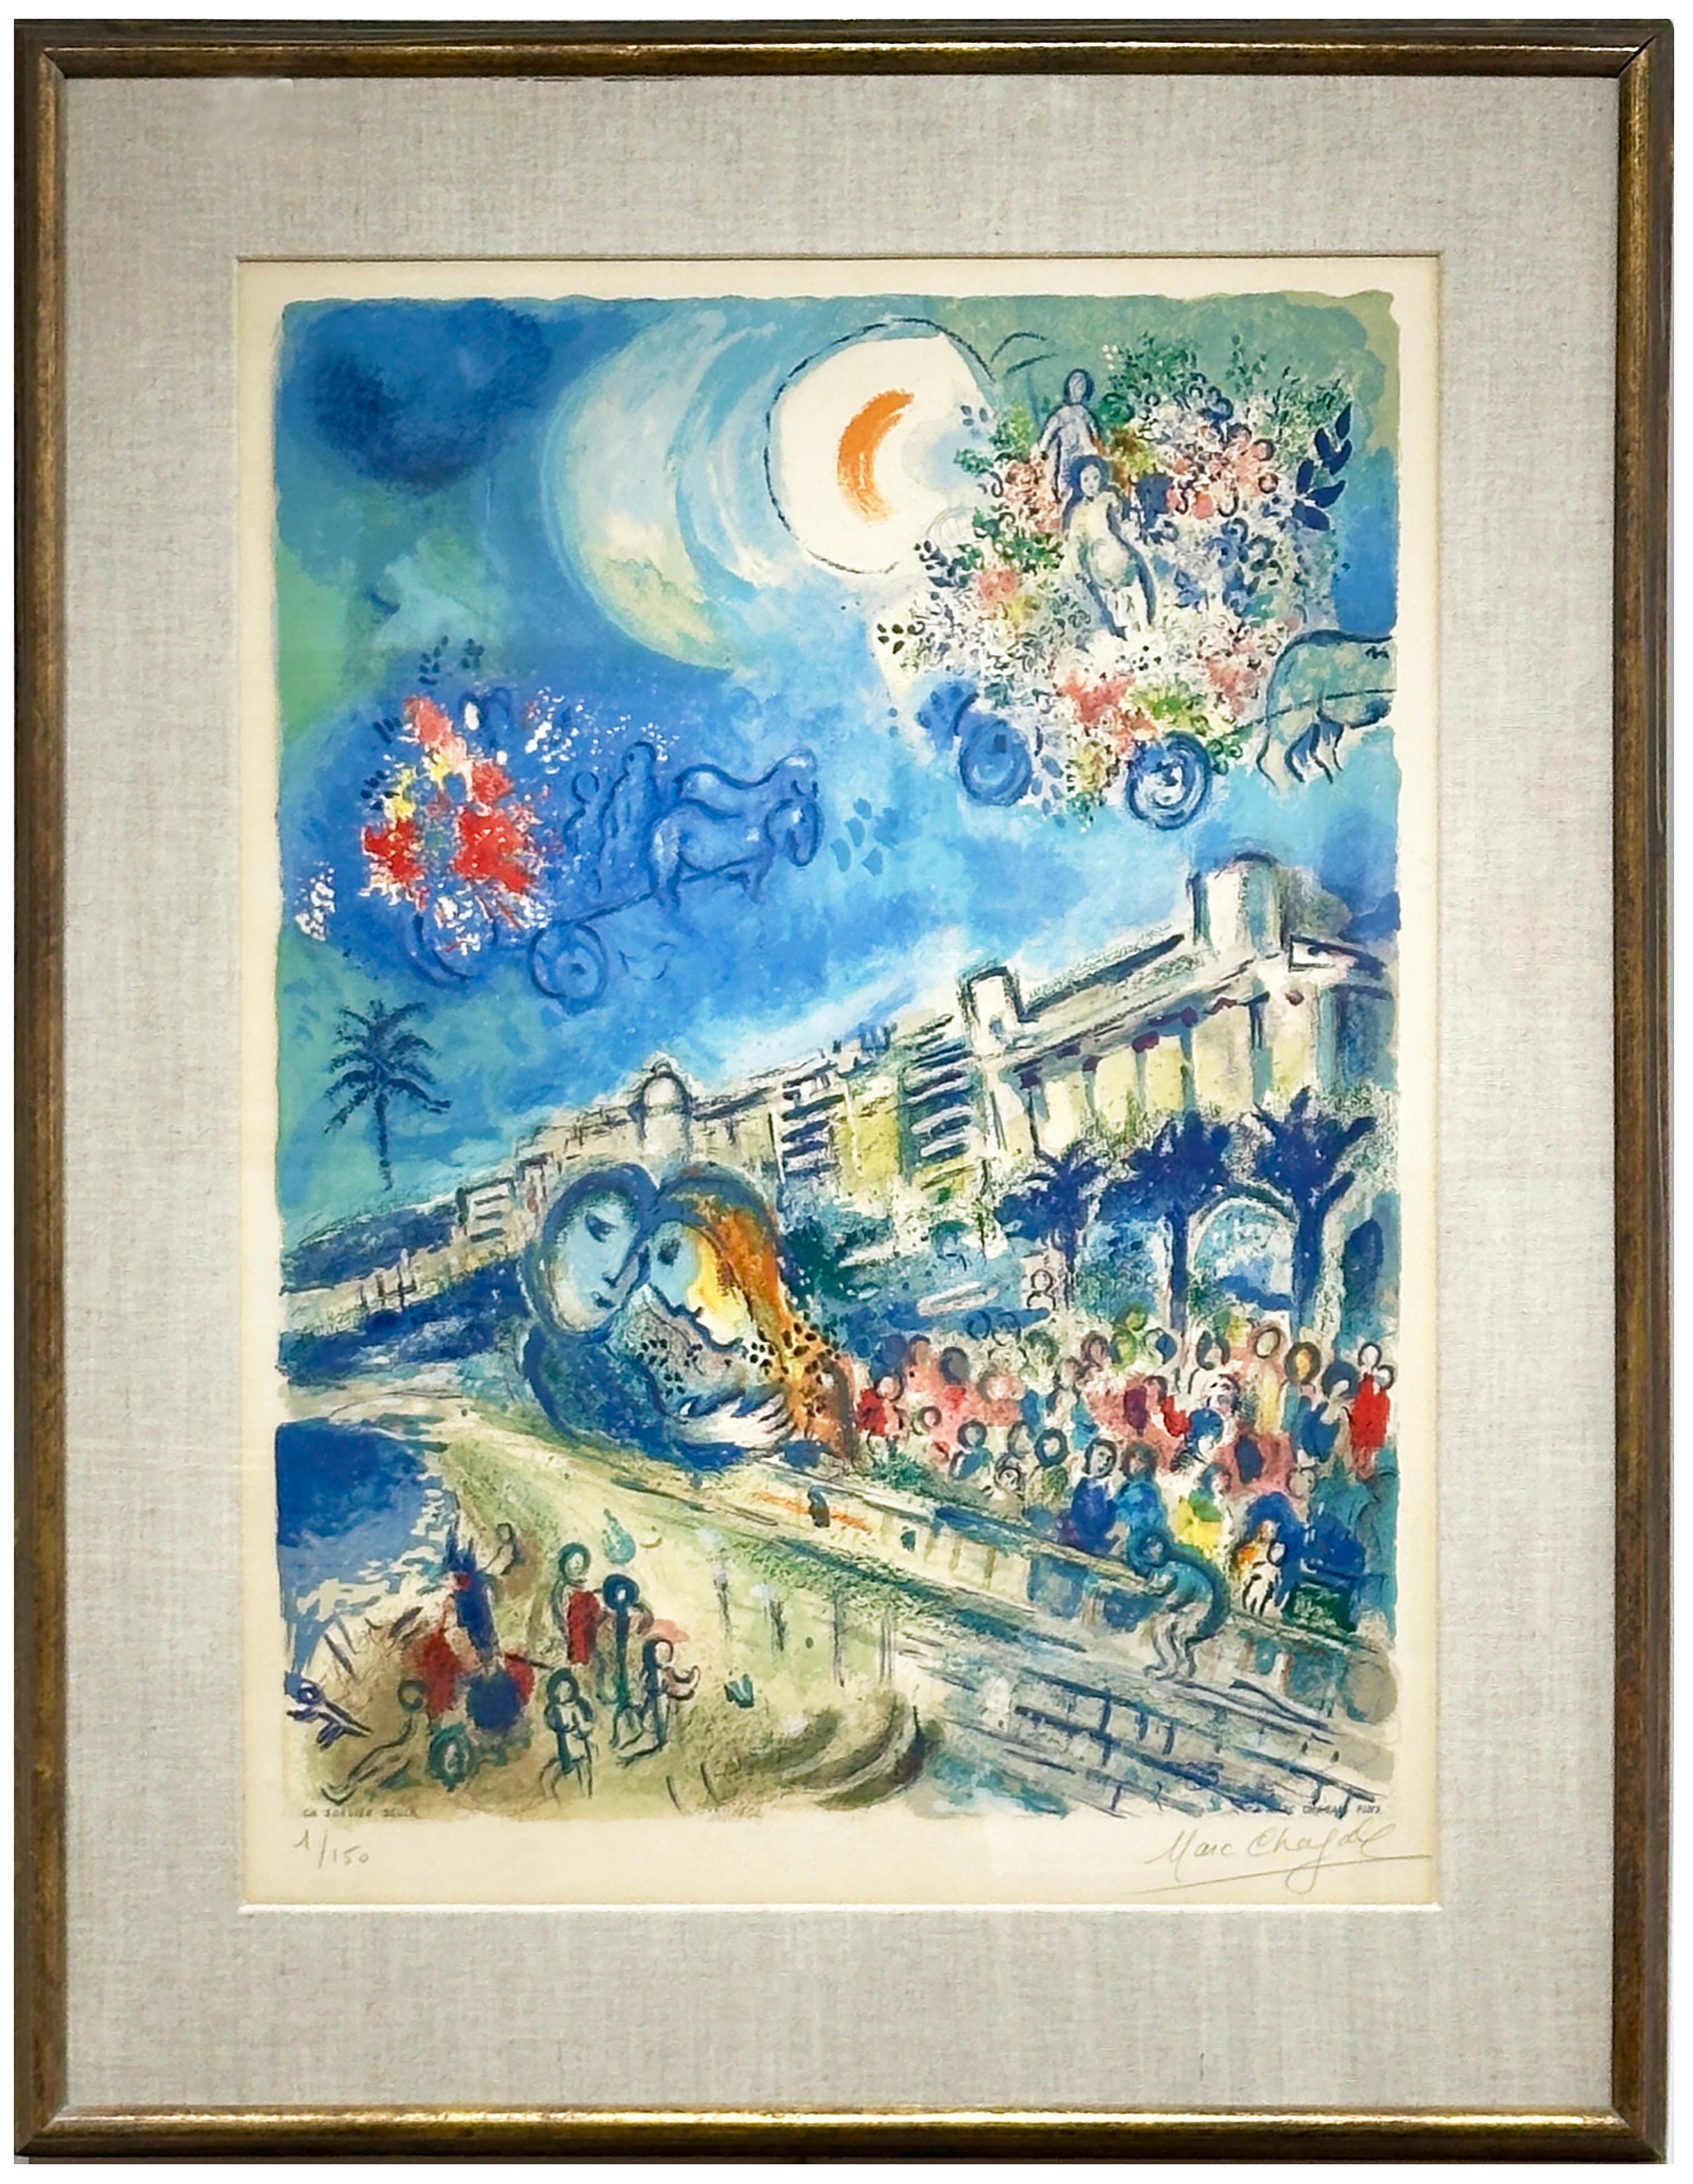 Bataille de Fleurs (Carnaval of Flowers) from Nice and the Côte d’Azur - Print by Marc Chagall